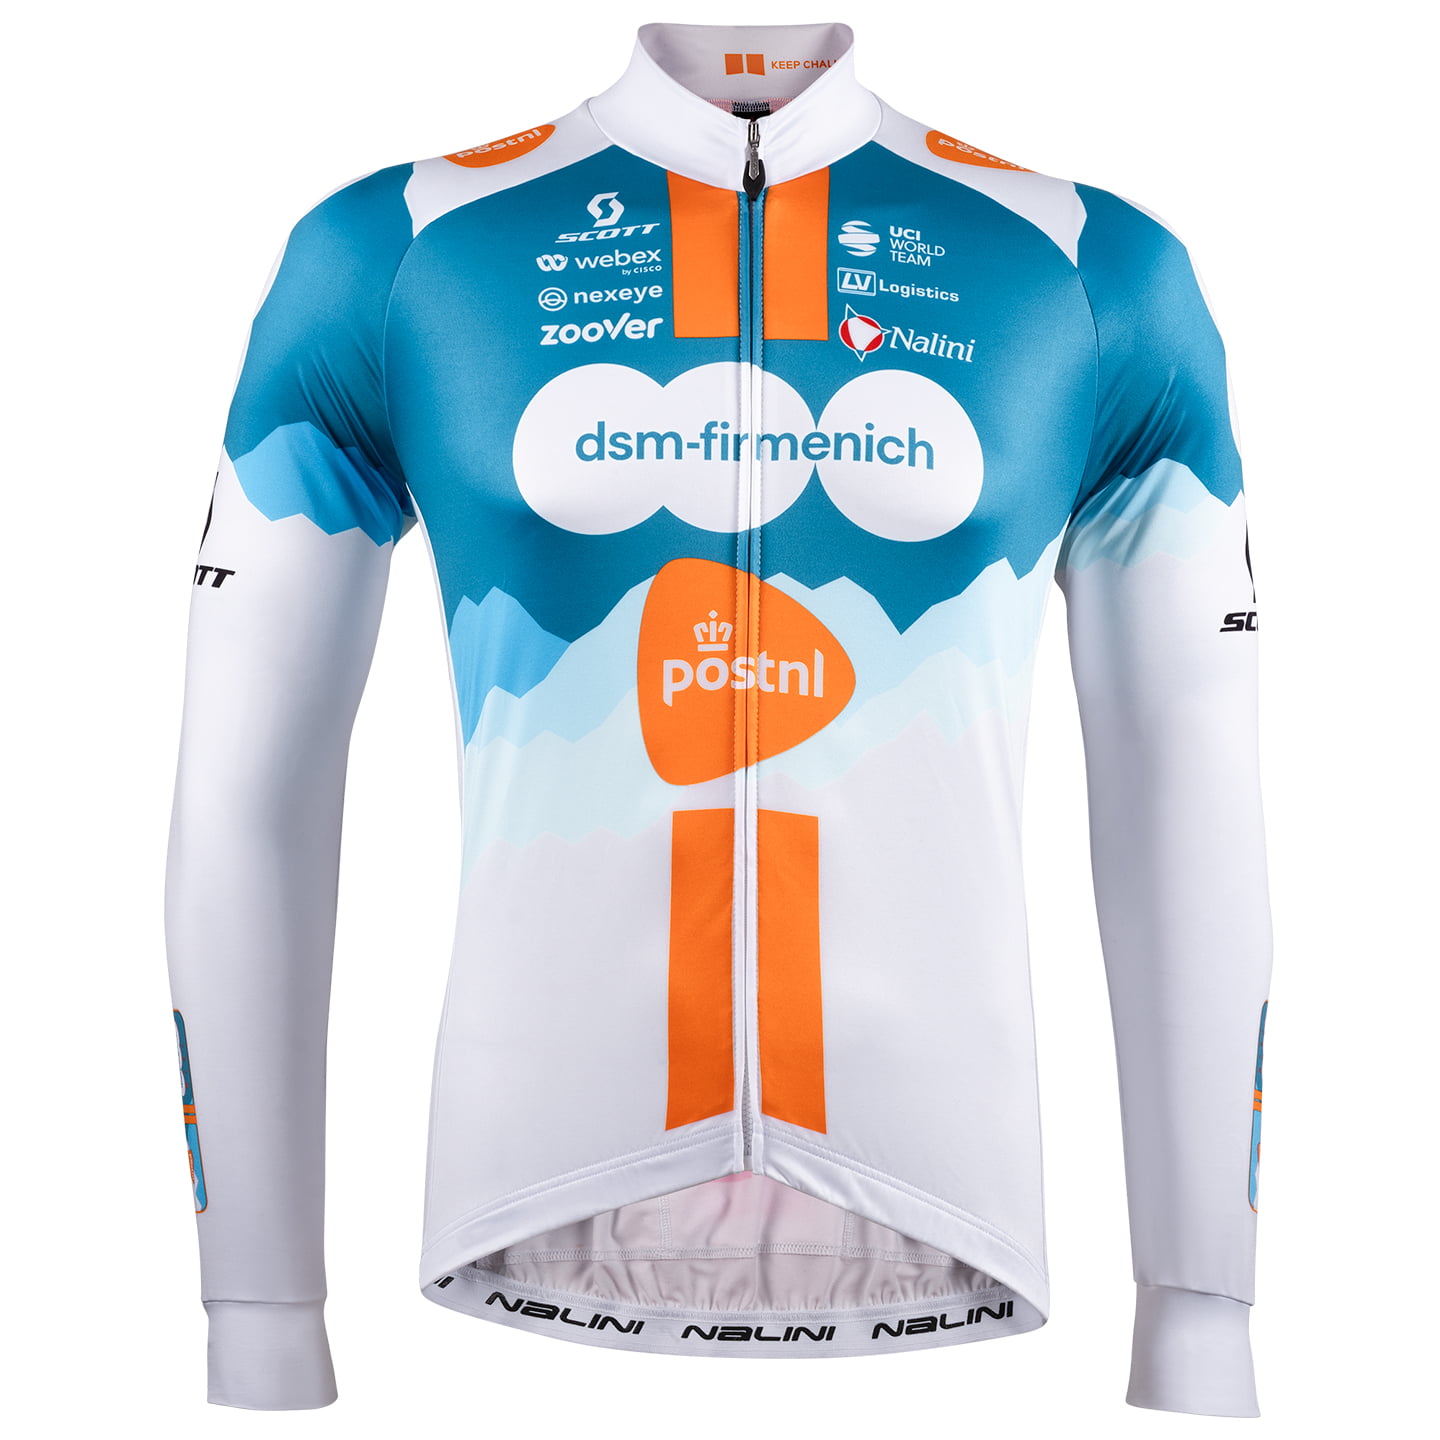 TEAM dsm-firmenich-PostNL 2024 Long Sleeve Jersey, for men, size L, Cycling shirt, Cycle clothing